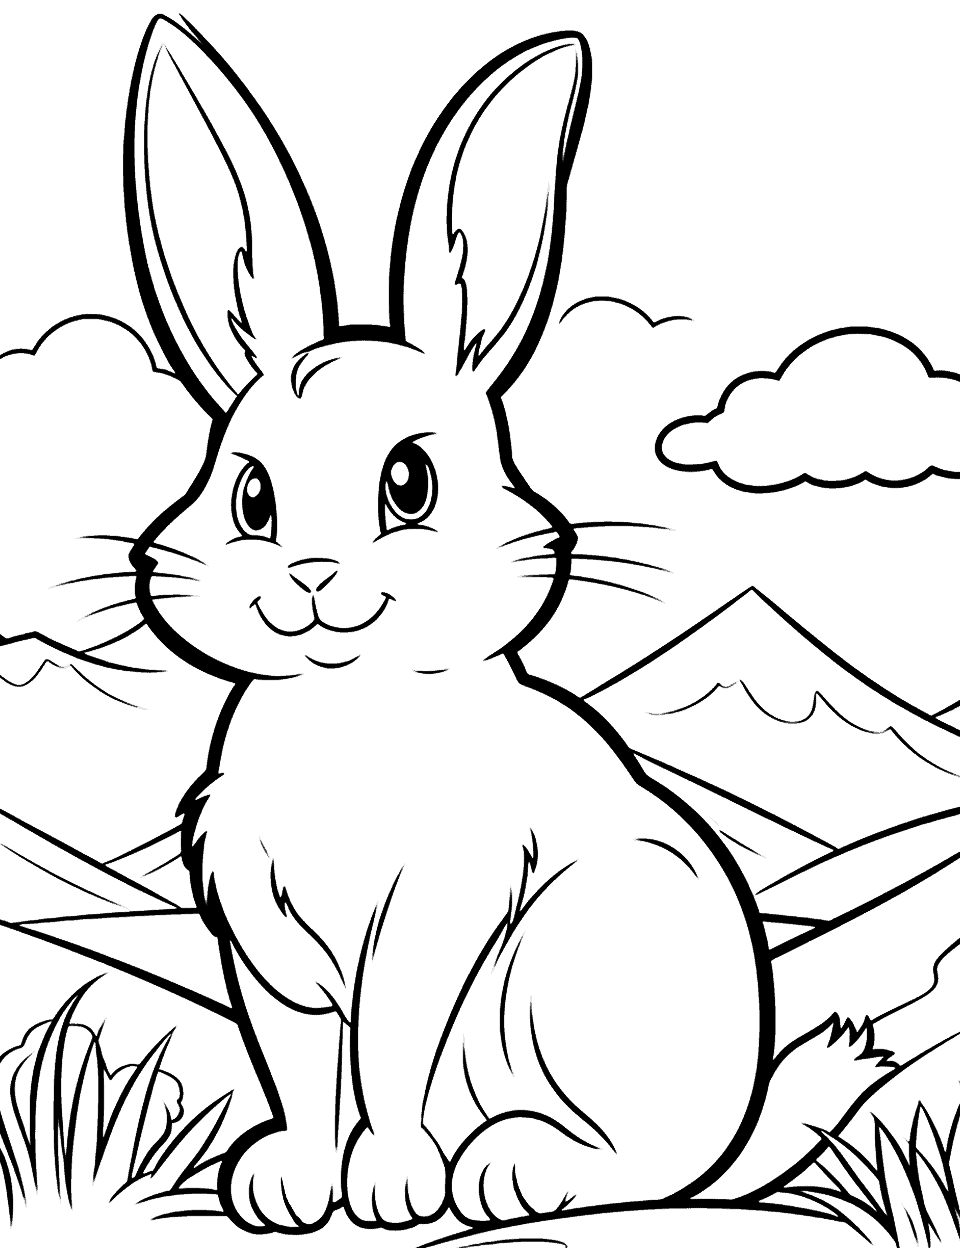 Big Bunny in a Small World Coloring Page - Emphasize the big size of our bunny set against vast landscapes like mountains or forests.